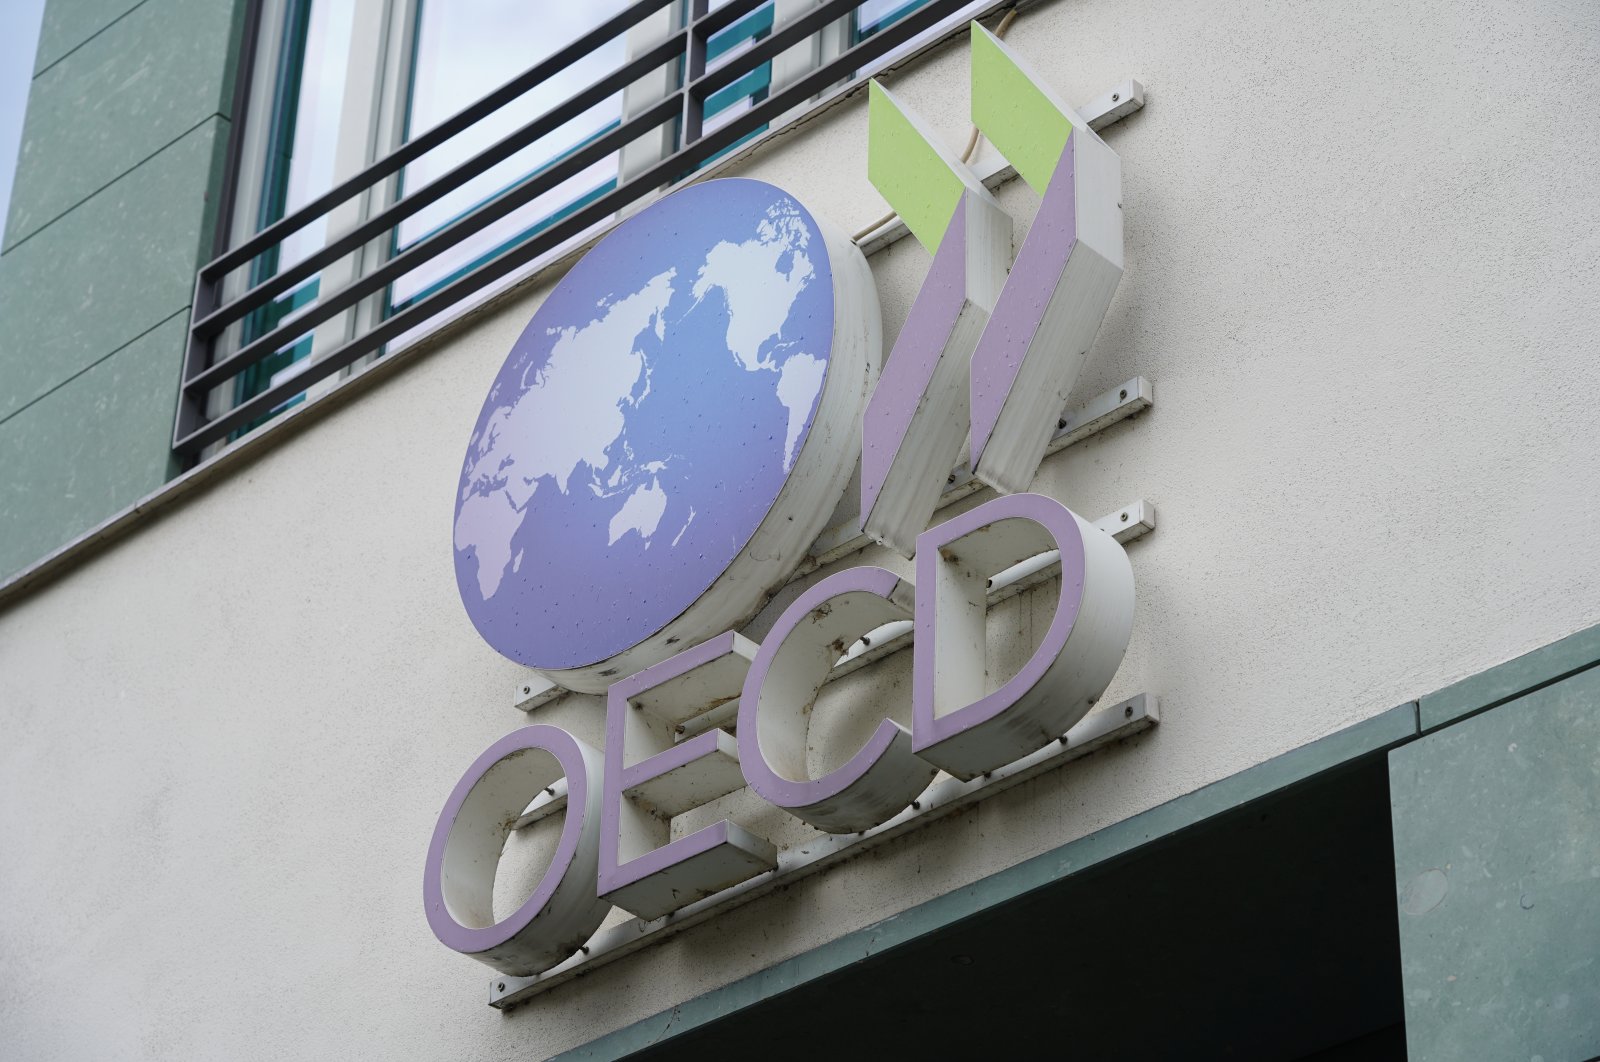 &quot;Establishing the Organization for Economic Co-operation and Development (OECD) Istanbul Regional Center in 2021, which commenced operations in June 2022, exemplifies this deepening cooperation.&quot; (Shutterstock Photo)